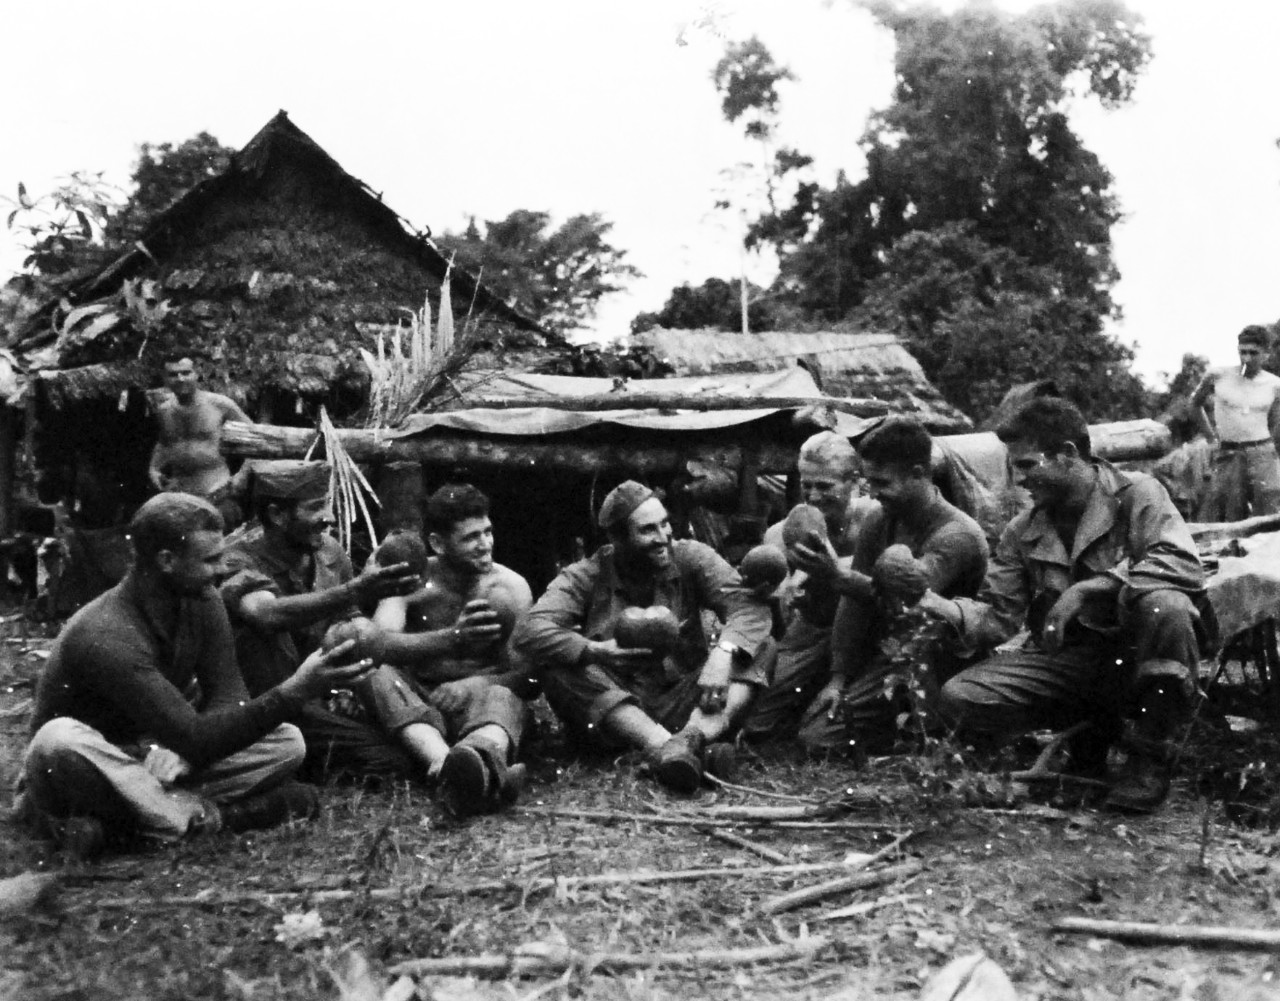 127-GW-966-77431: Battle of Cape Gloucester, New Britain, December 1943-January 1944 “Birthday Toast”. A toast if drunk in coconut juice on the occasion of the 24th birthday of Sergeant Milan A. Cicak, USMC. The birthday found him and his buddies...